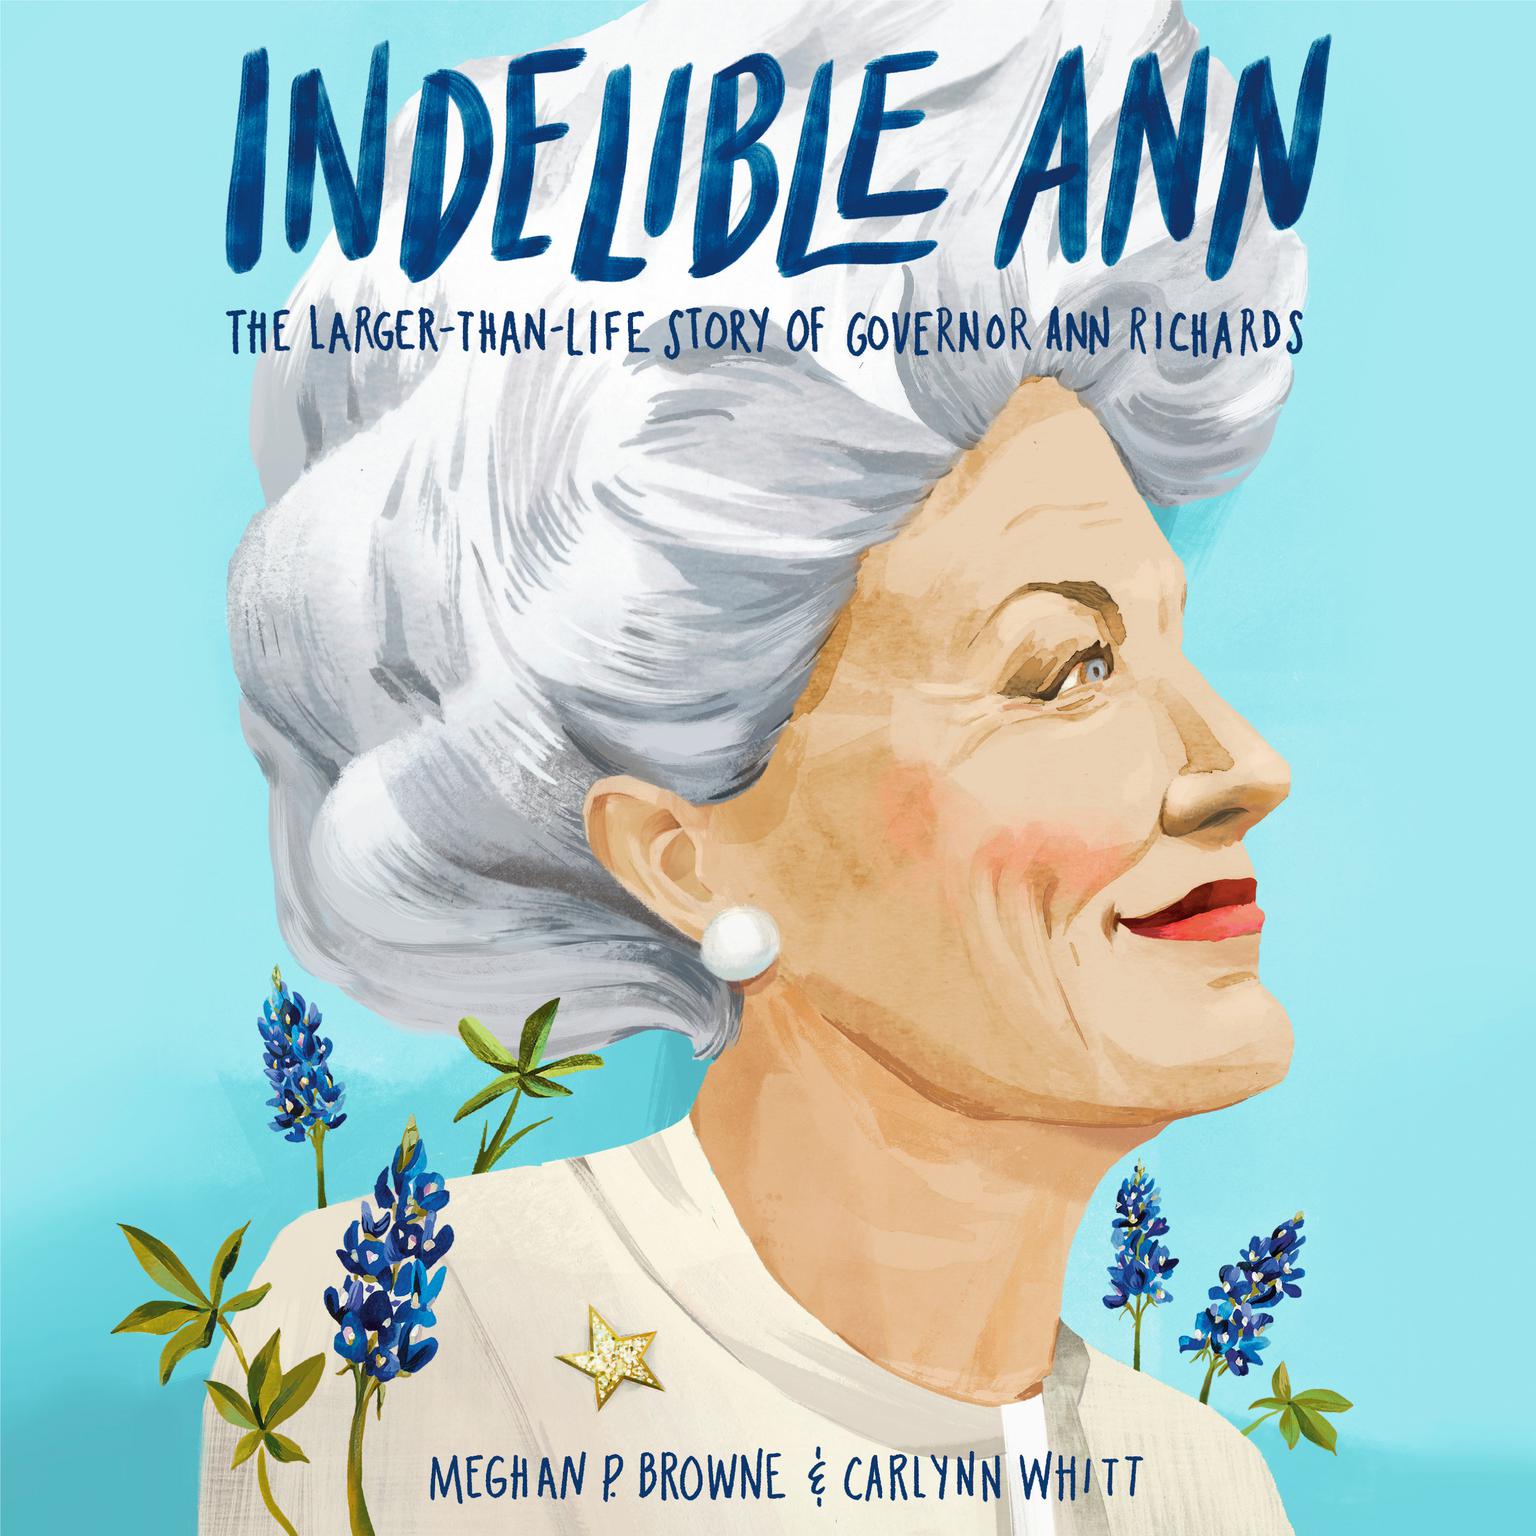 Indelible Ann: The Larger-Than-Life Story of Governor Ann Richards Audiobook, by Meghan P. Browne